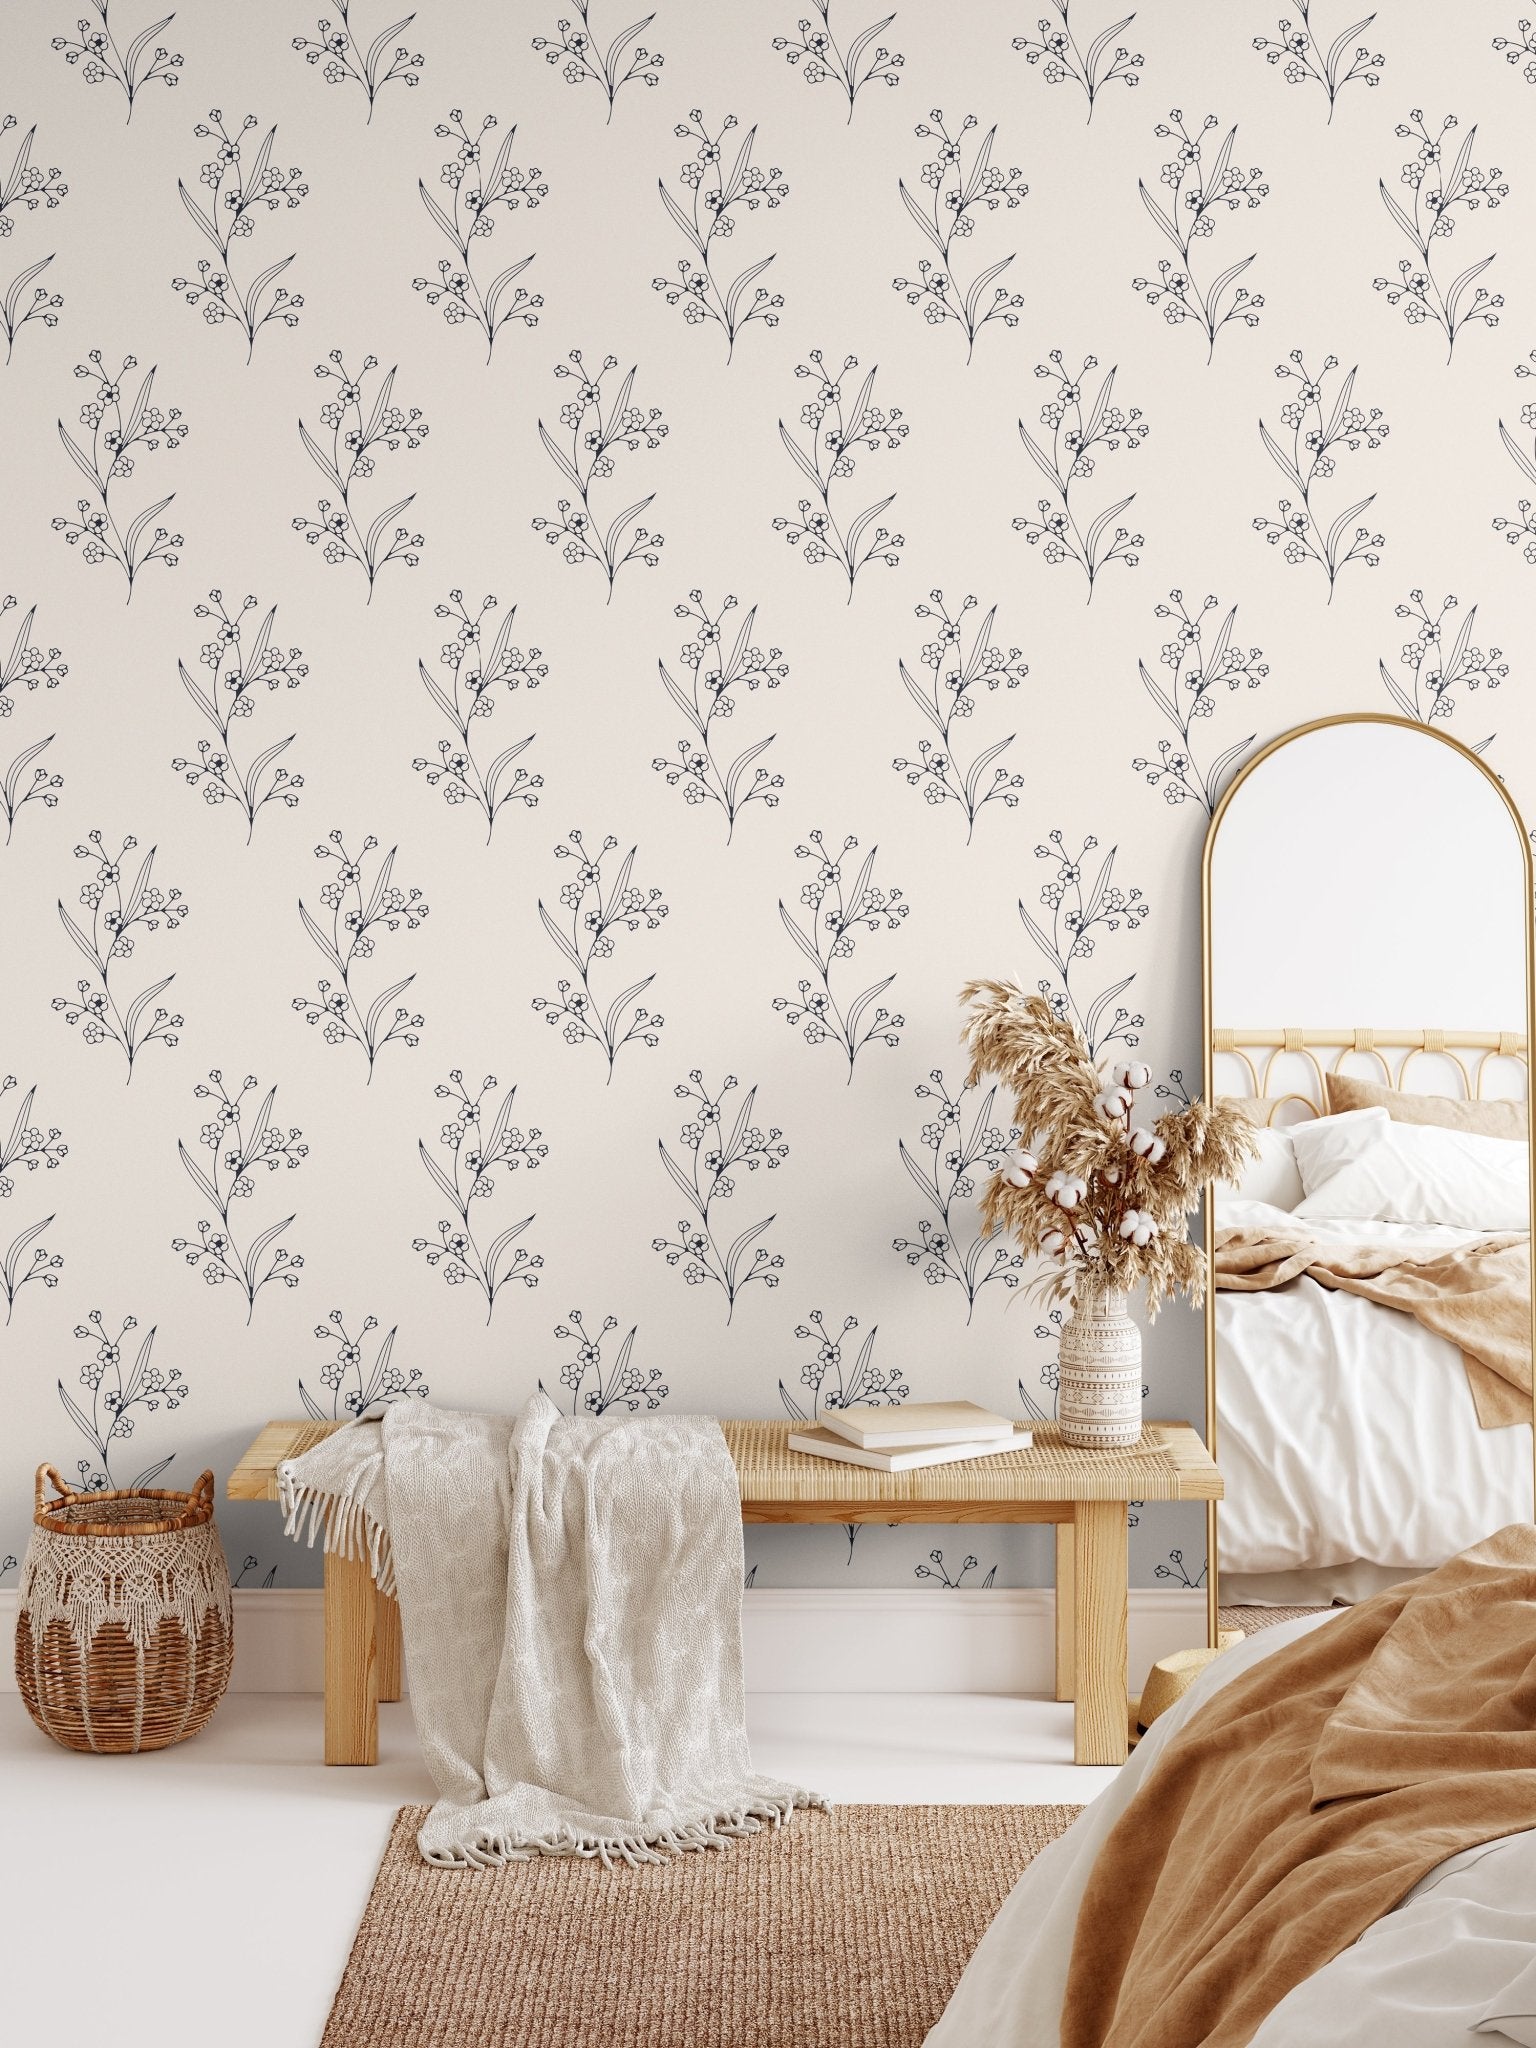 A bohemian style bedroom with aesthetic sketched twig peel and stick wallpaper